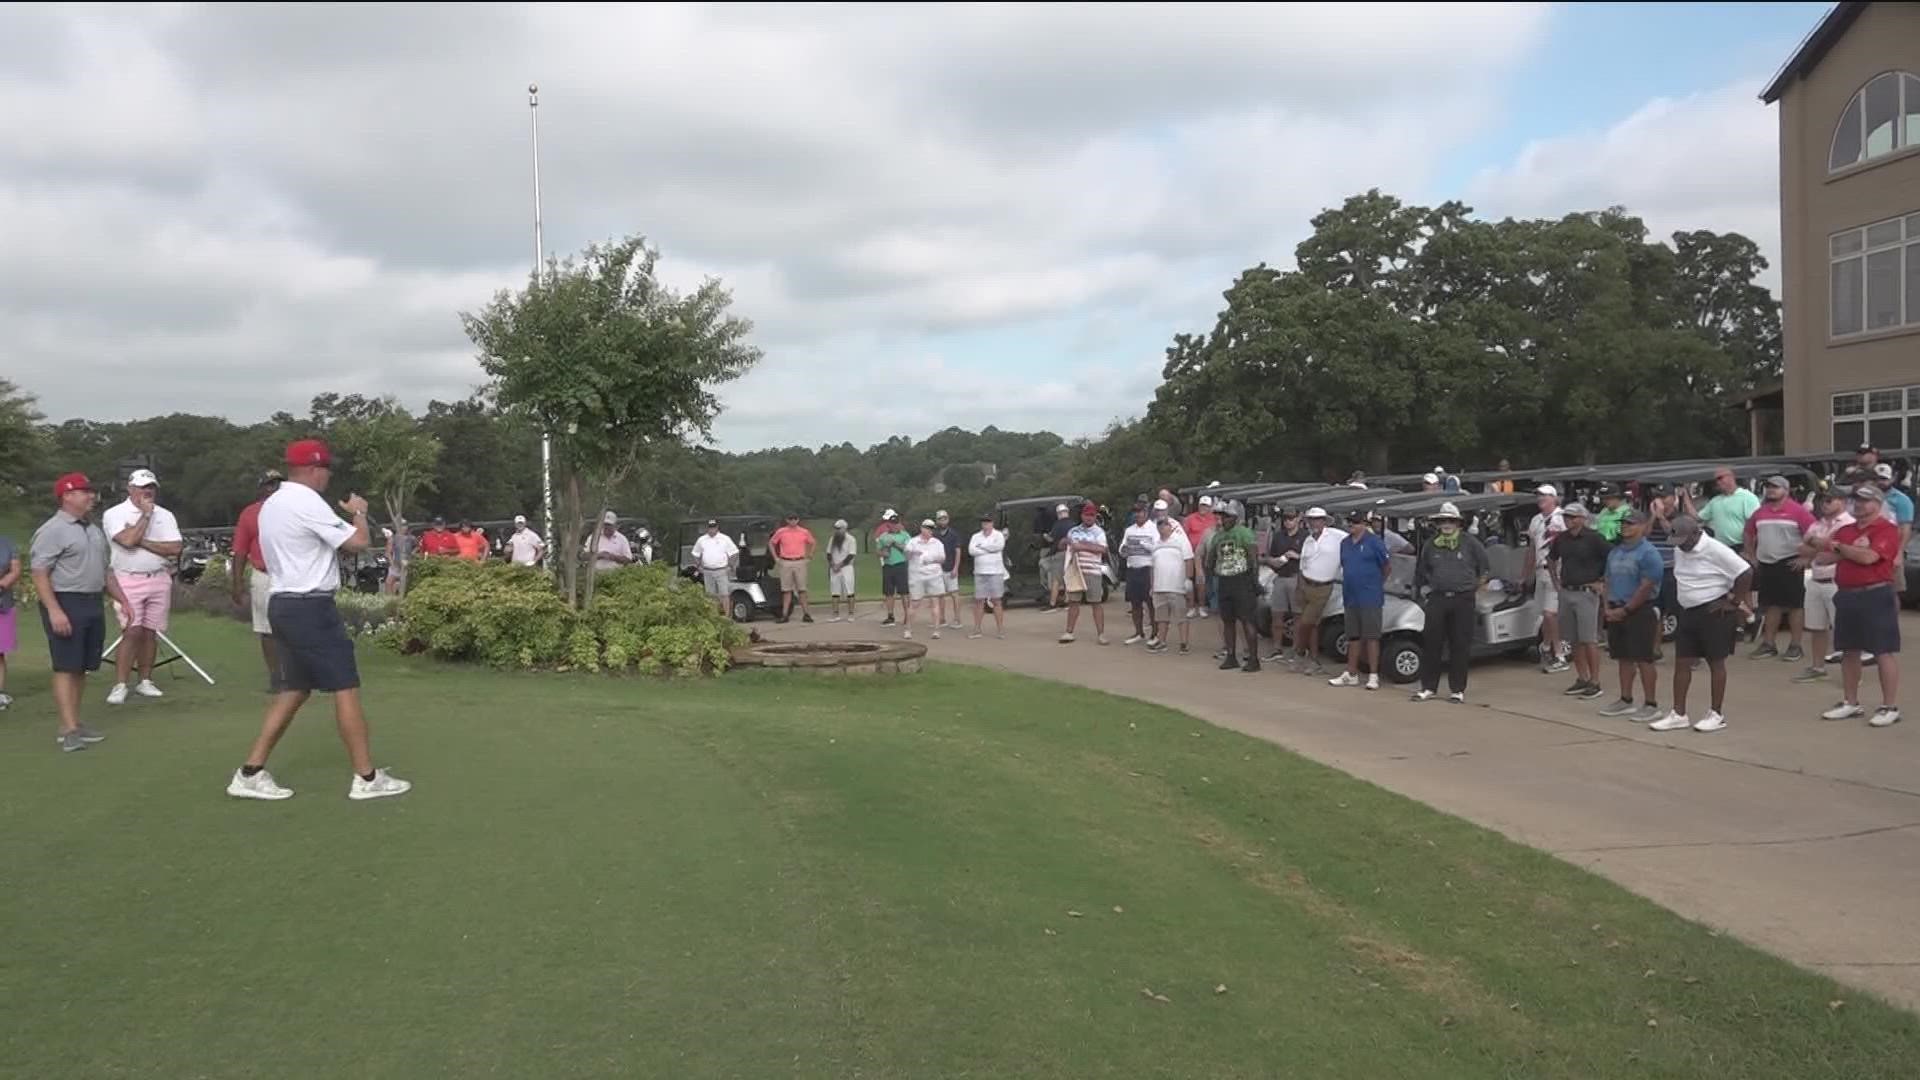 The Veteran's Golf Association hosted a golf tournament in Tyler for a great cause.